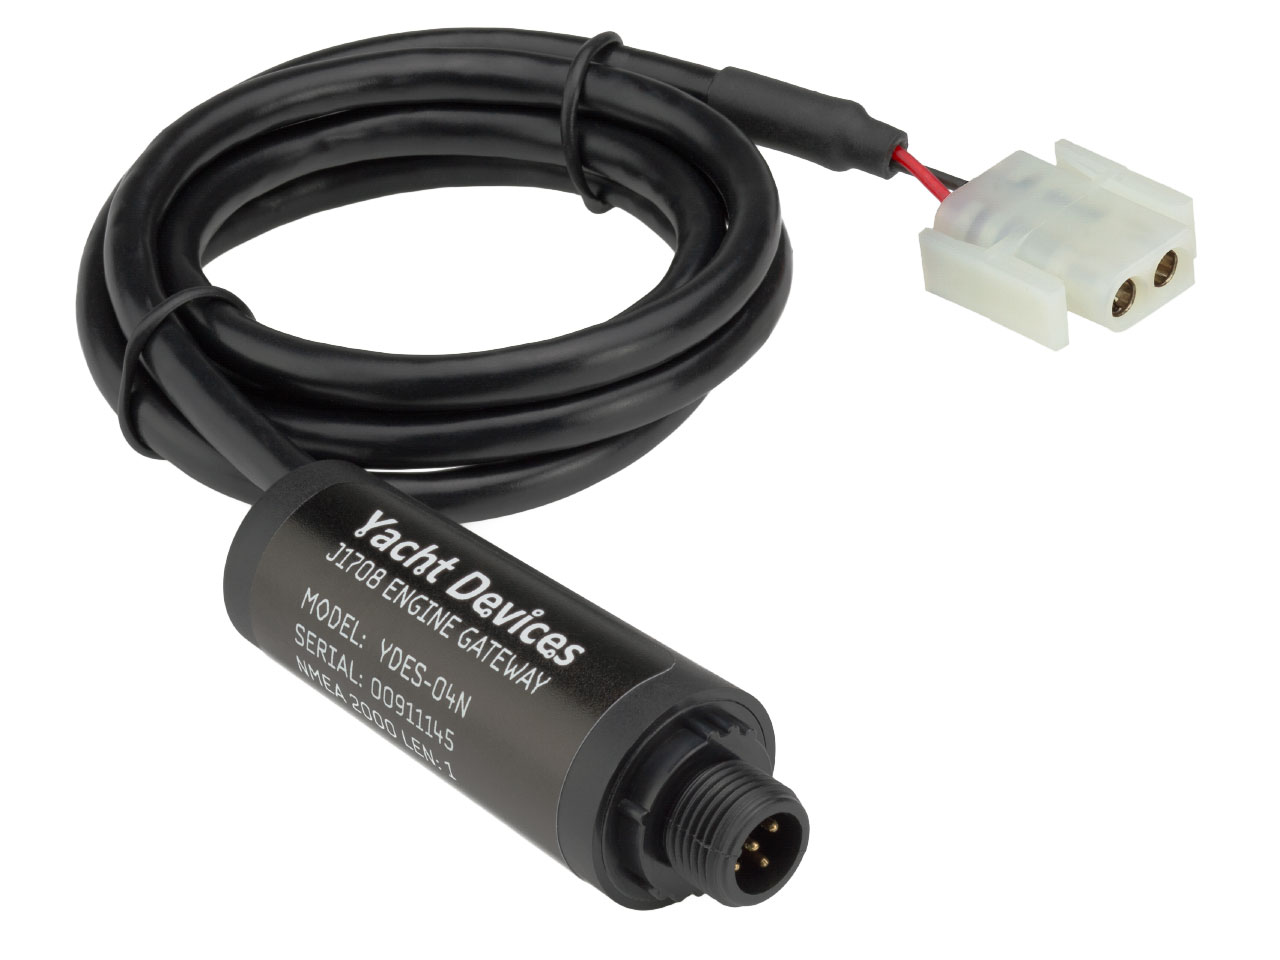 YDES-04N model, with NMEA 2000 Micro Male connector